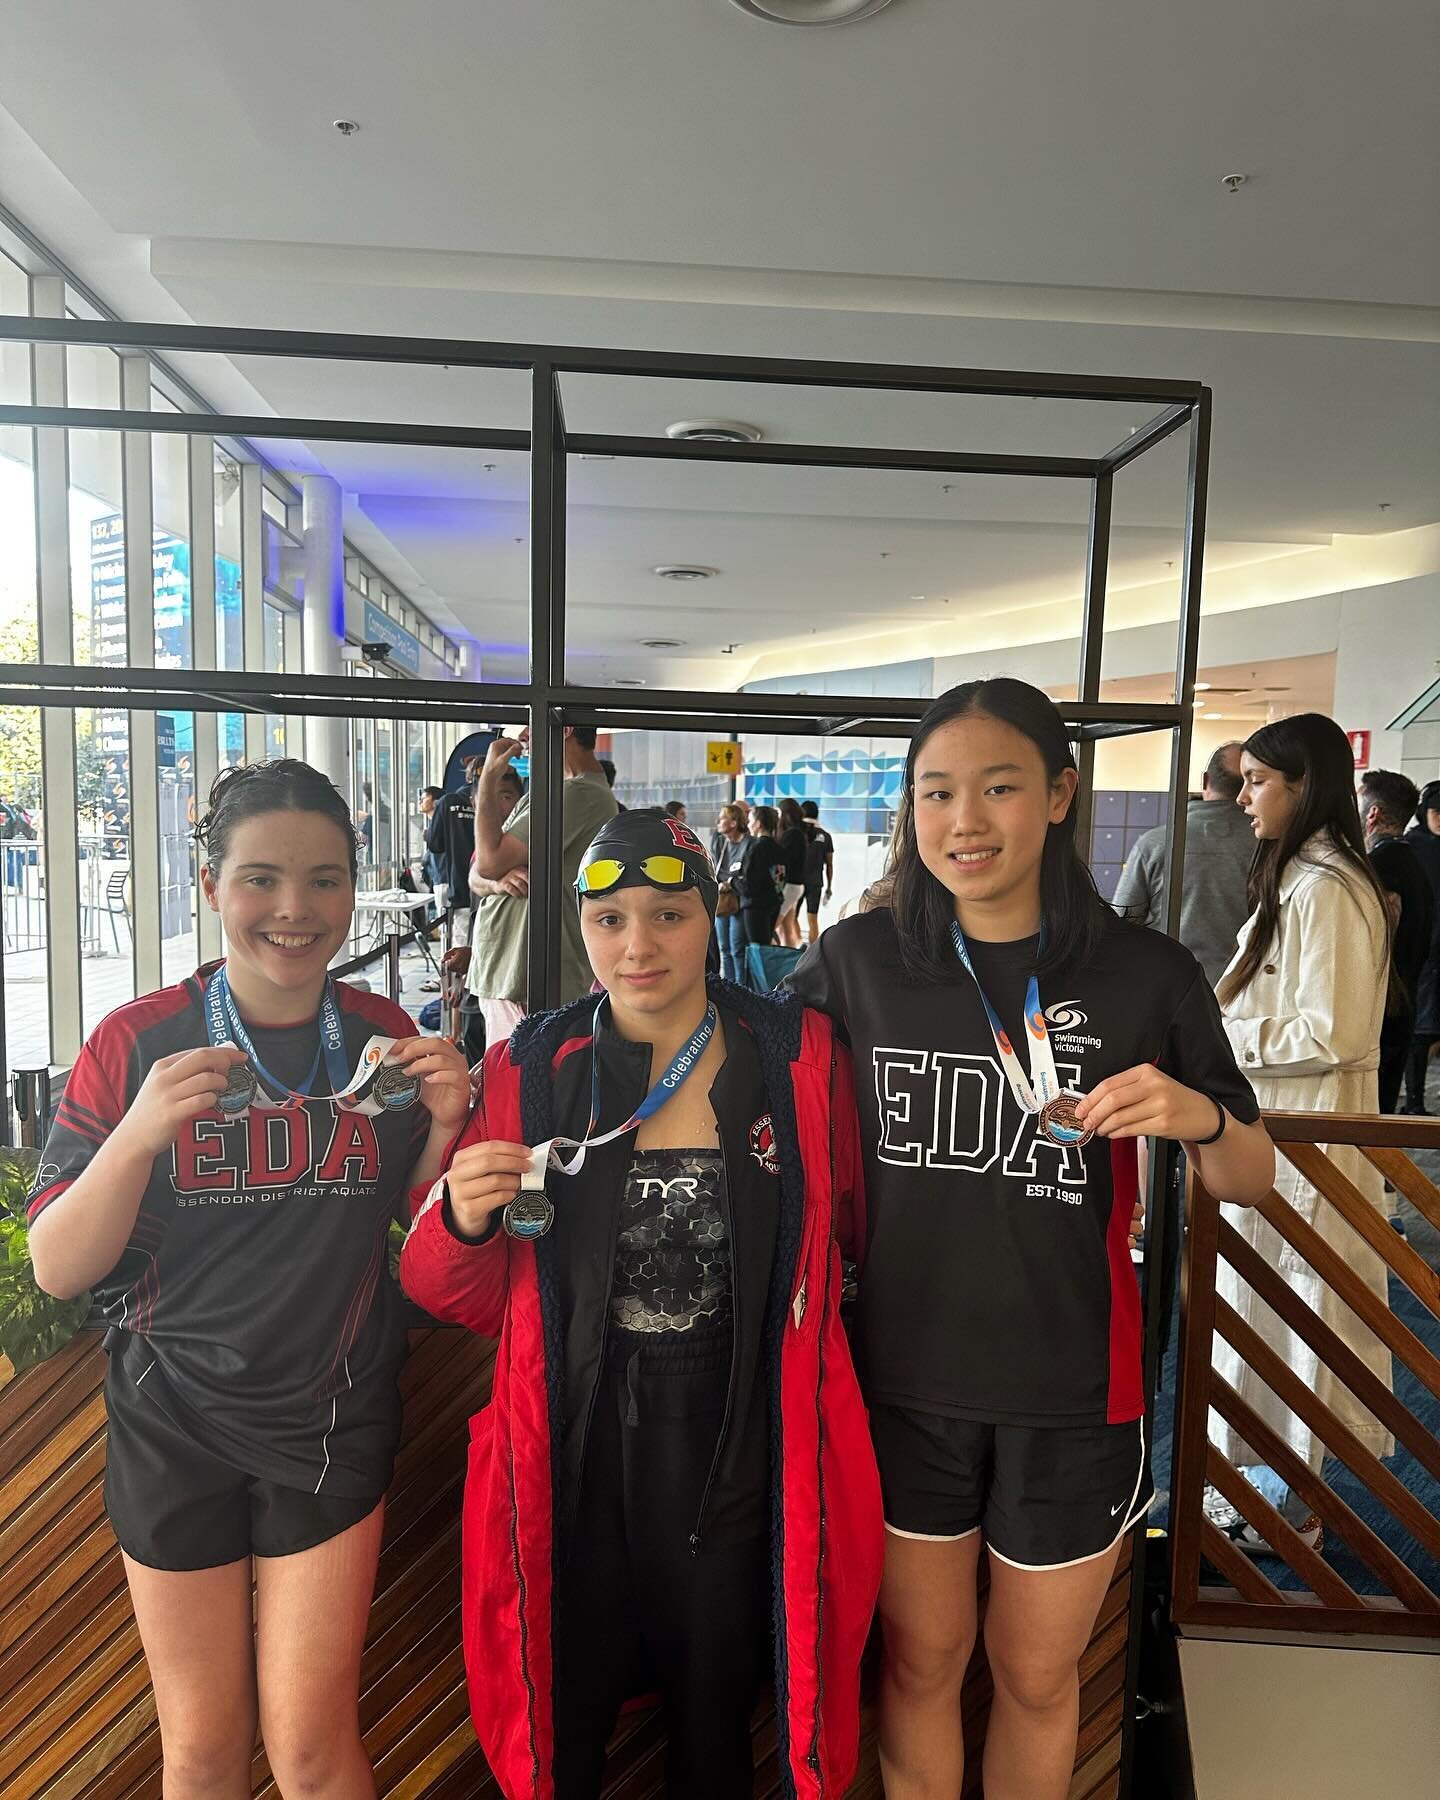 Victorian Age Championships Day 4 Finals!
Another amazing night for EDA with Mia, Ruolan and Molly picking up 5 medals between them. 
Molly had two great swims dropping over 11seconds in her 100m Back. Ruolan backed up her morning swim with another P